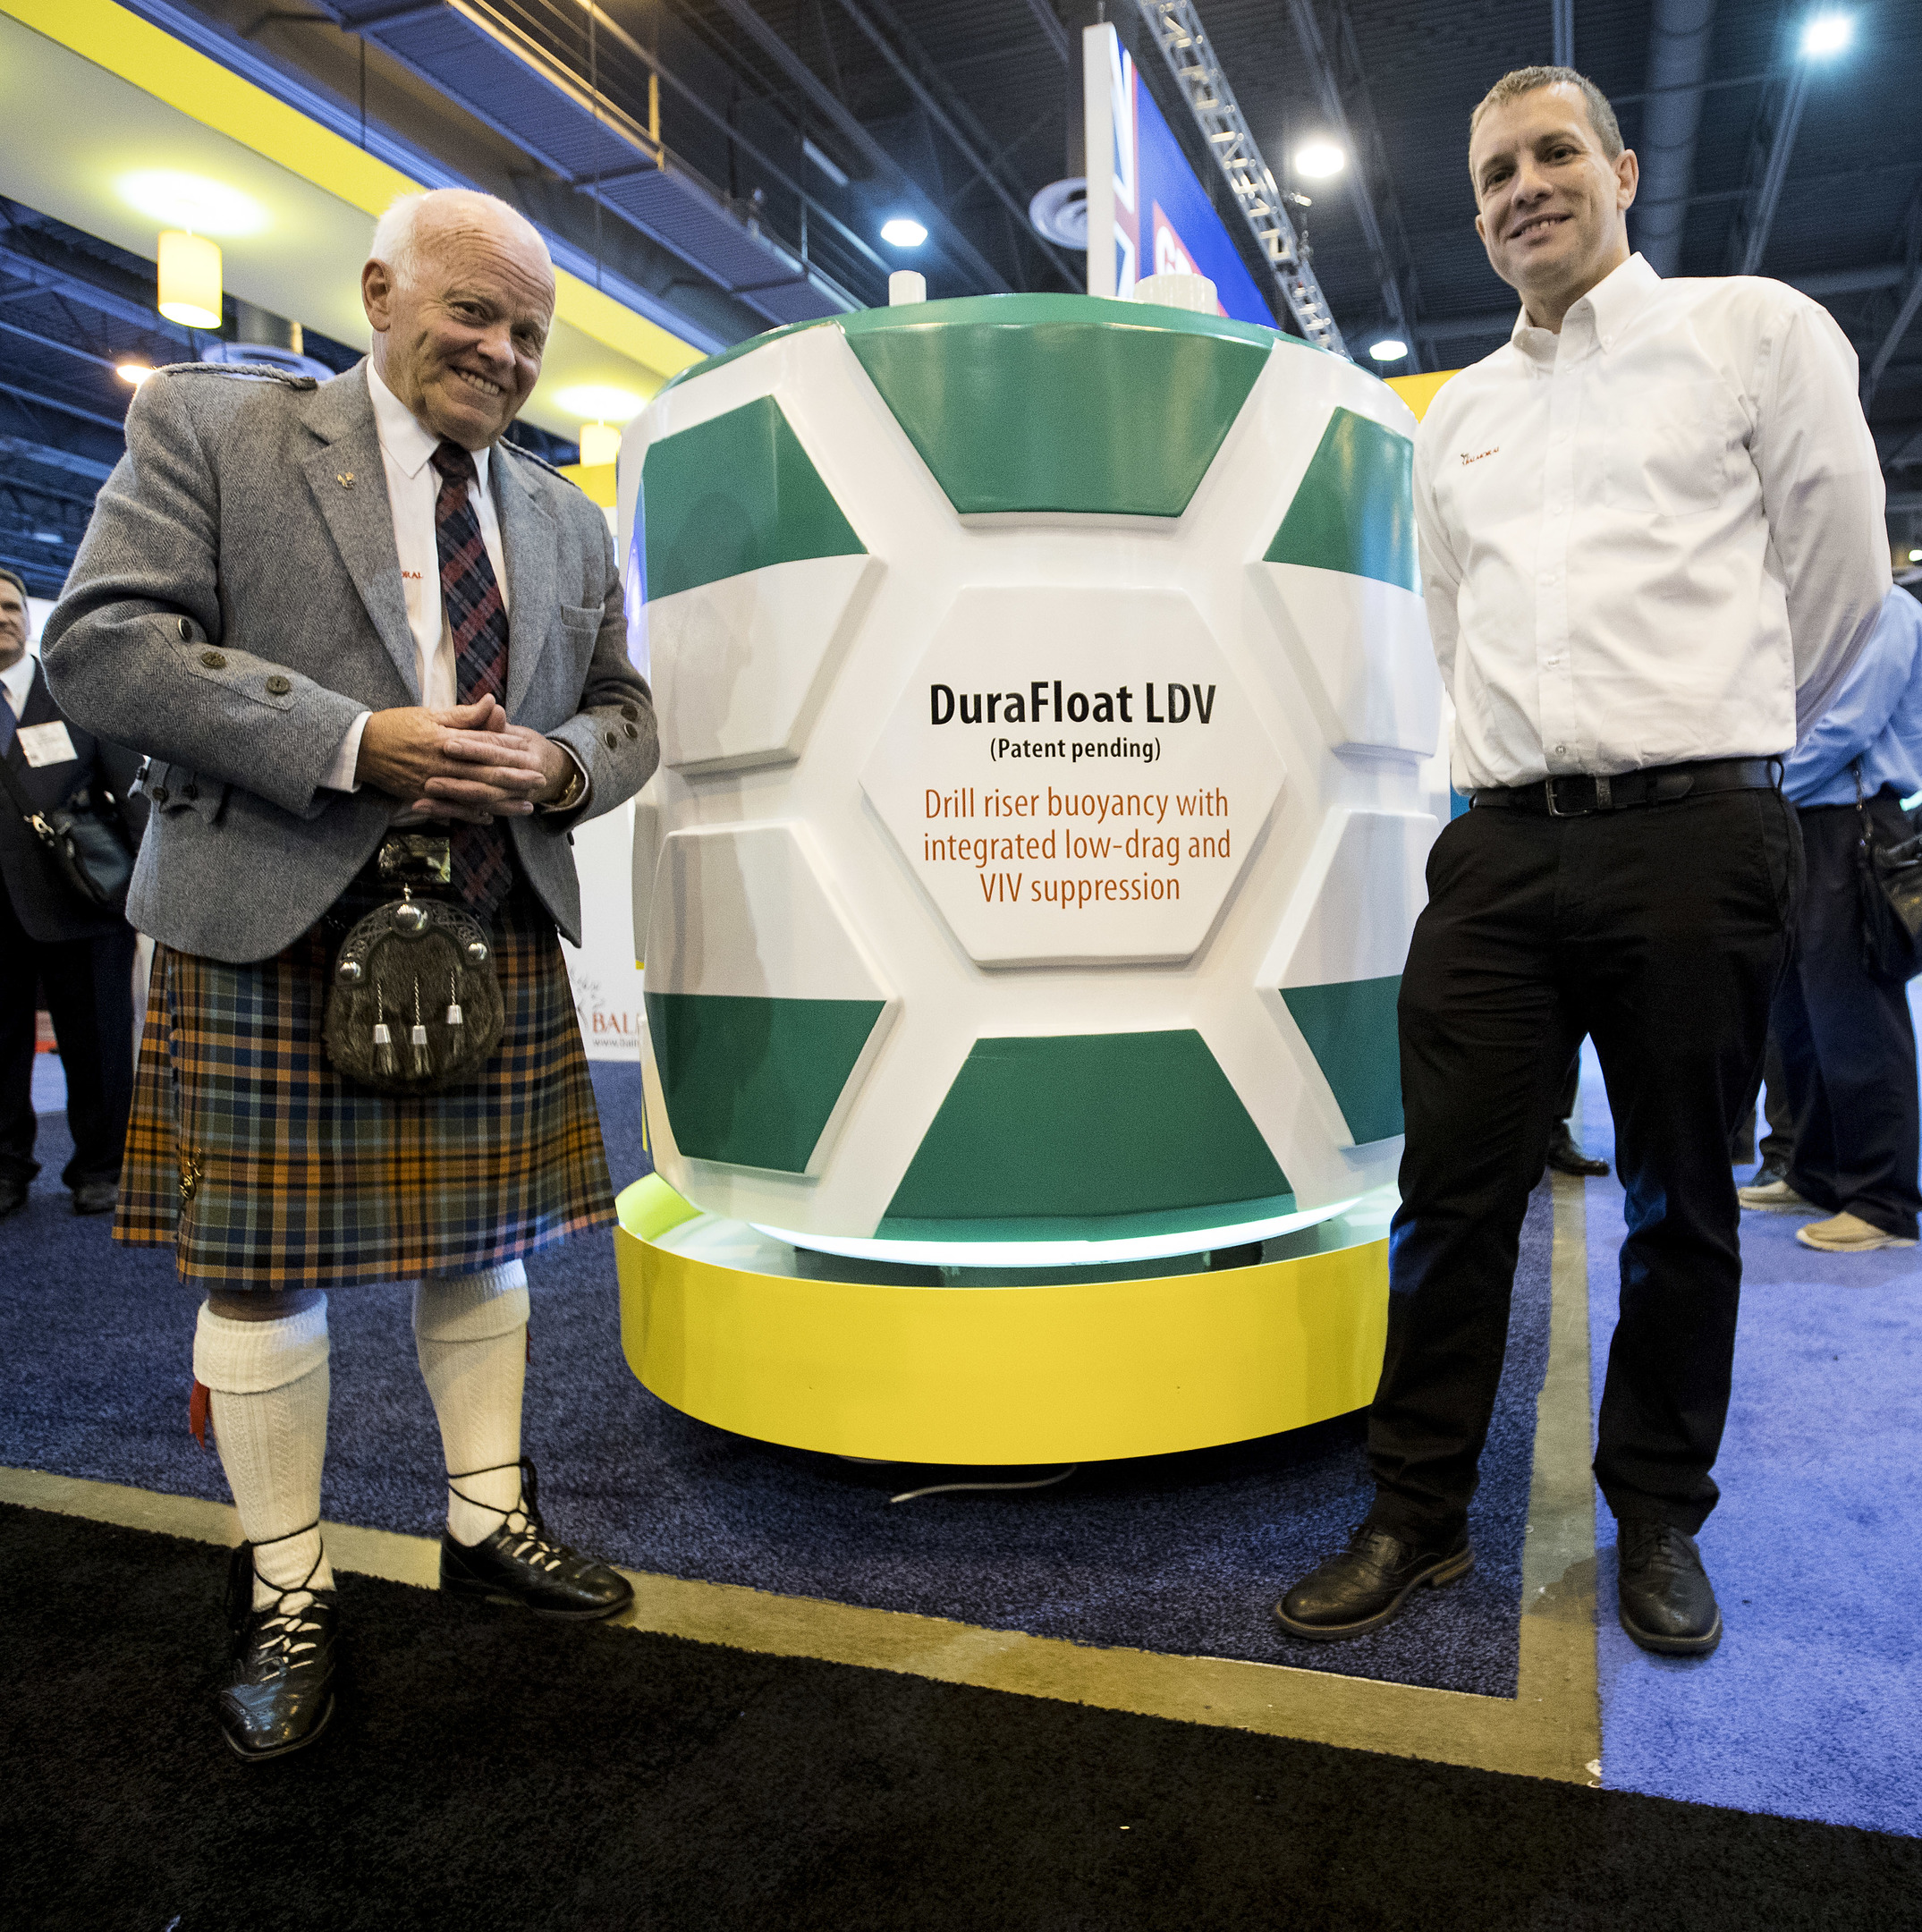 Jim Milne, managing director, Balmoral Group, left, and Fraser Milne, engineering and projects director of Balmoral Offshore Engineering, pose for a photo after unveiling the Durafloat LDV, deepwater riser buoyancy system, during the 50th Offshore Technology Conference on Monday, April 30, 2018, in Houston. ( Brett Coomer / Houston Chronicle )